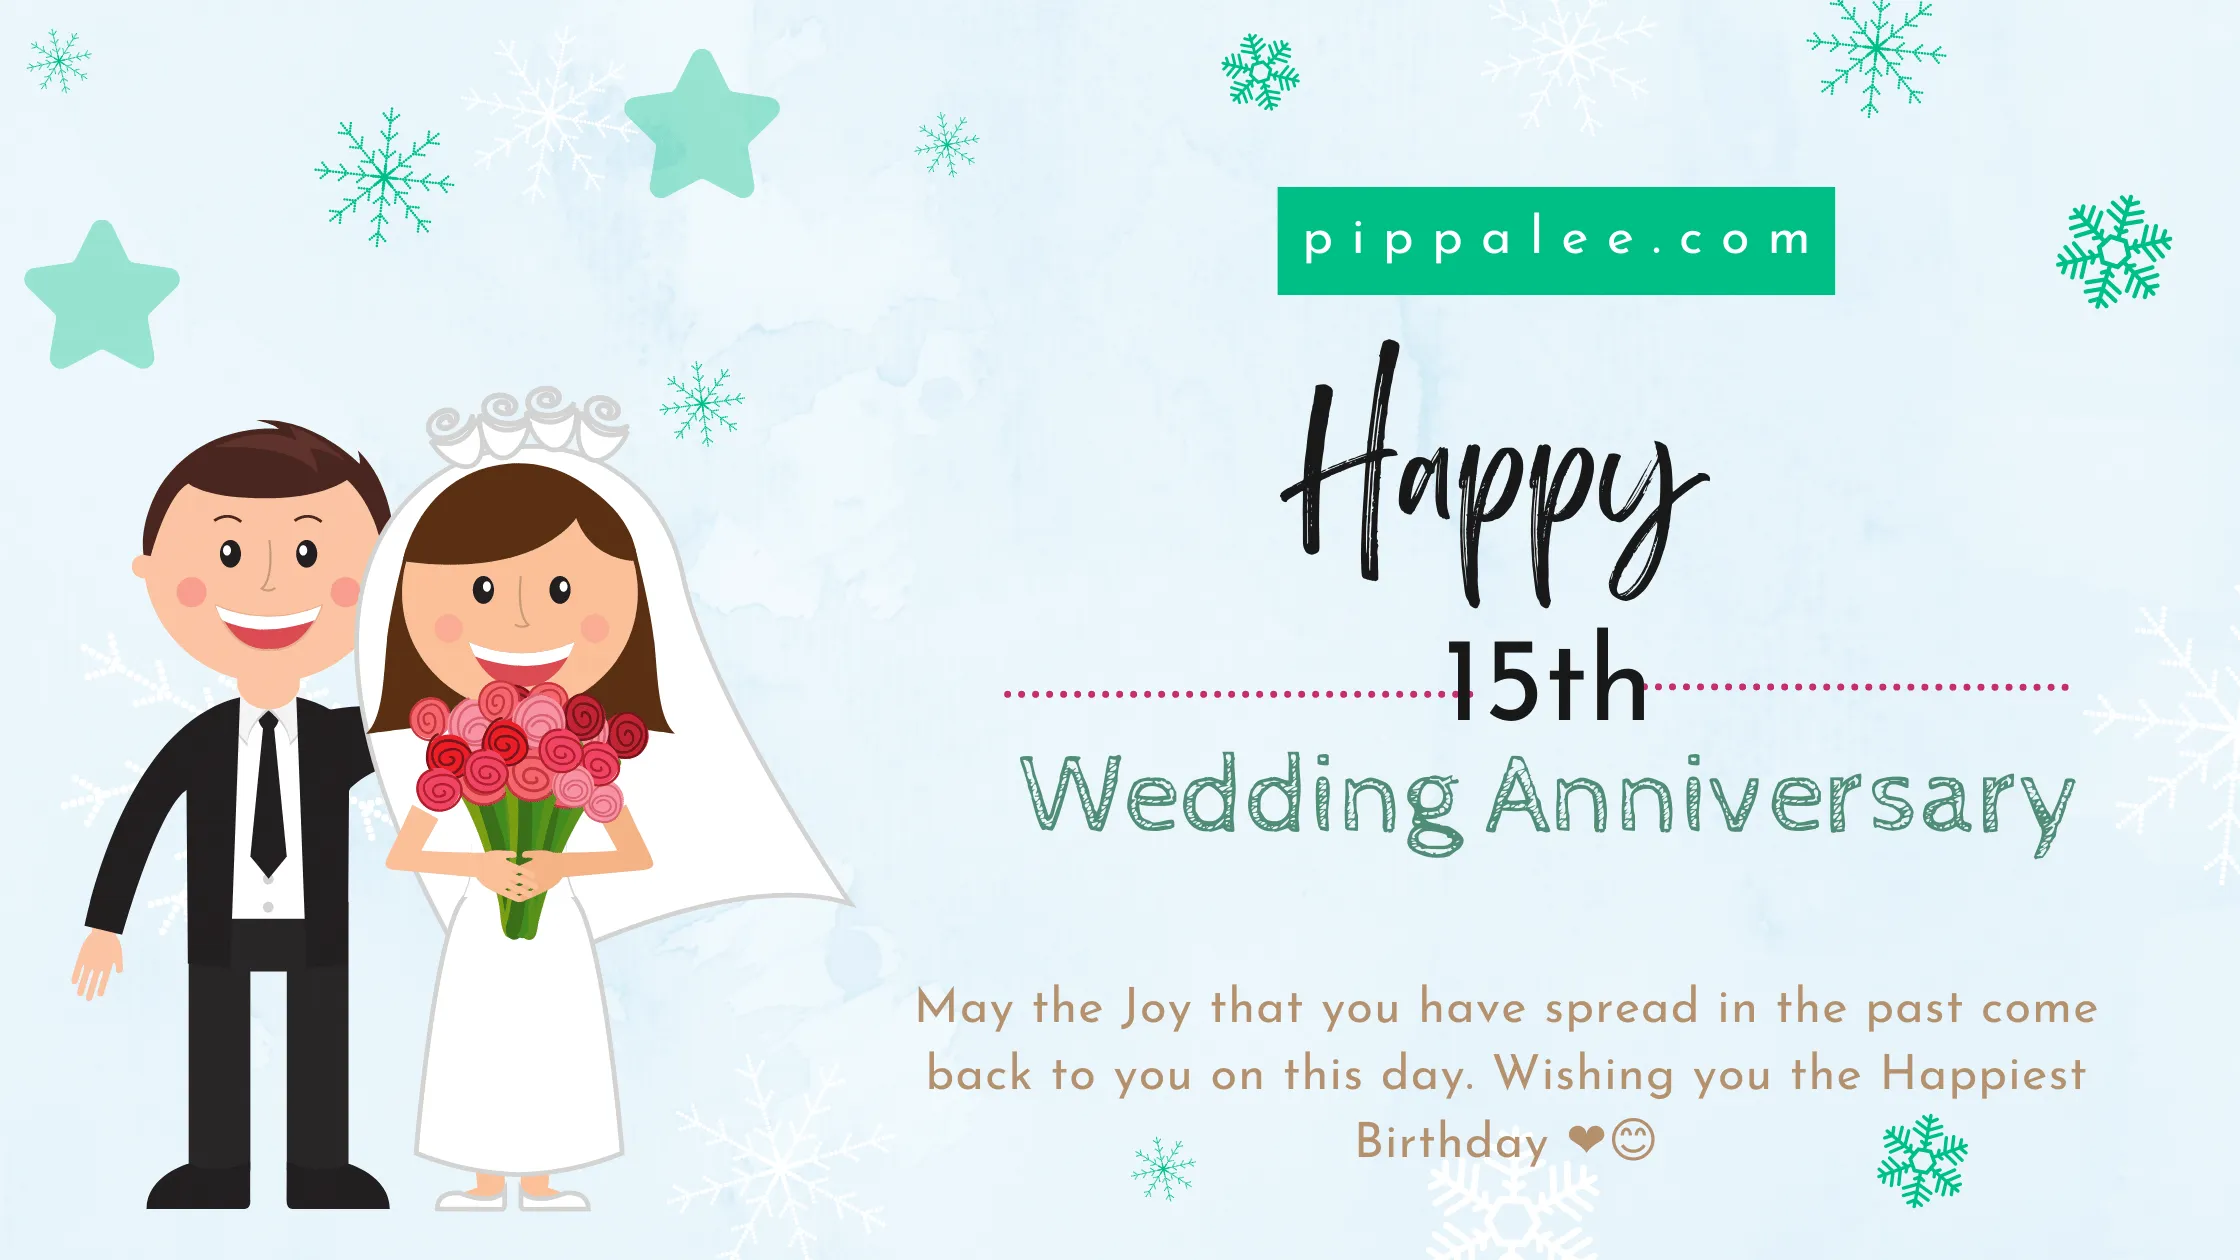 15th Wedding Anniversary - Wishes & Messages